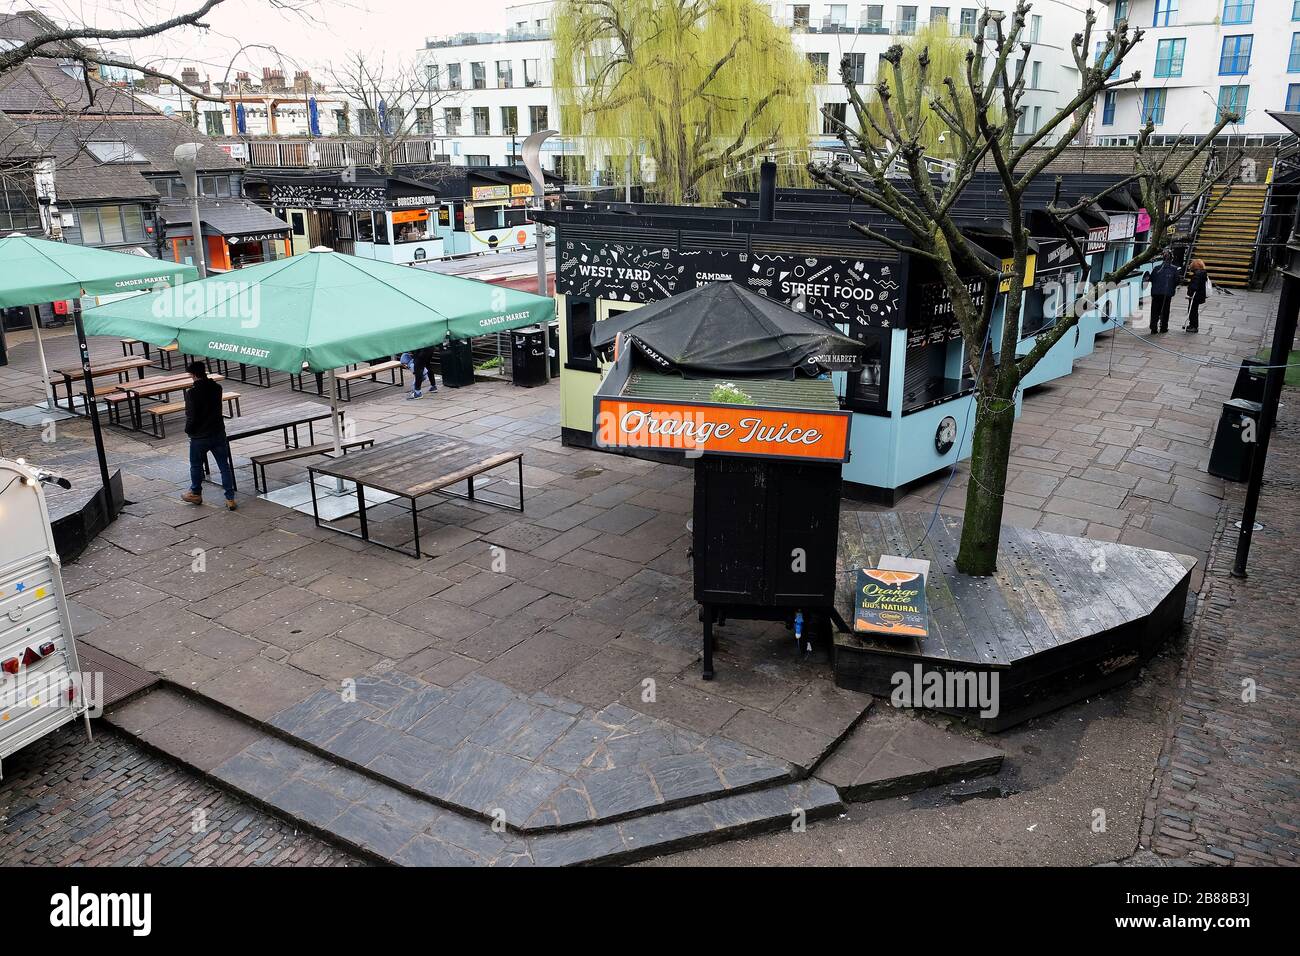 Camden Market, London, England - March 20, 2020: Tourists and shoppers stay away from Camden Market during the Coronavirus Pandemic Stock Photo